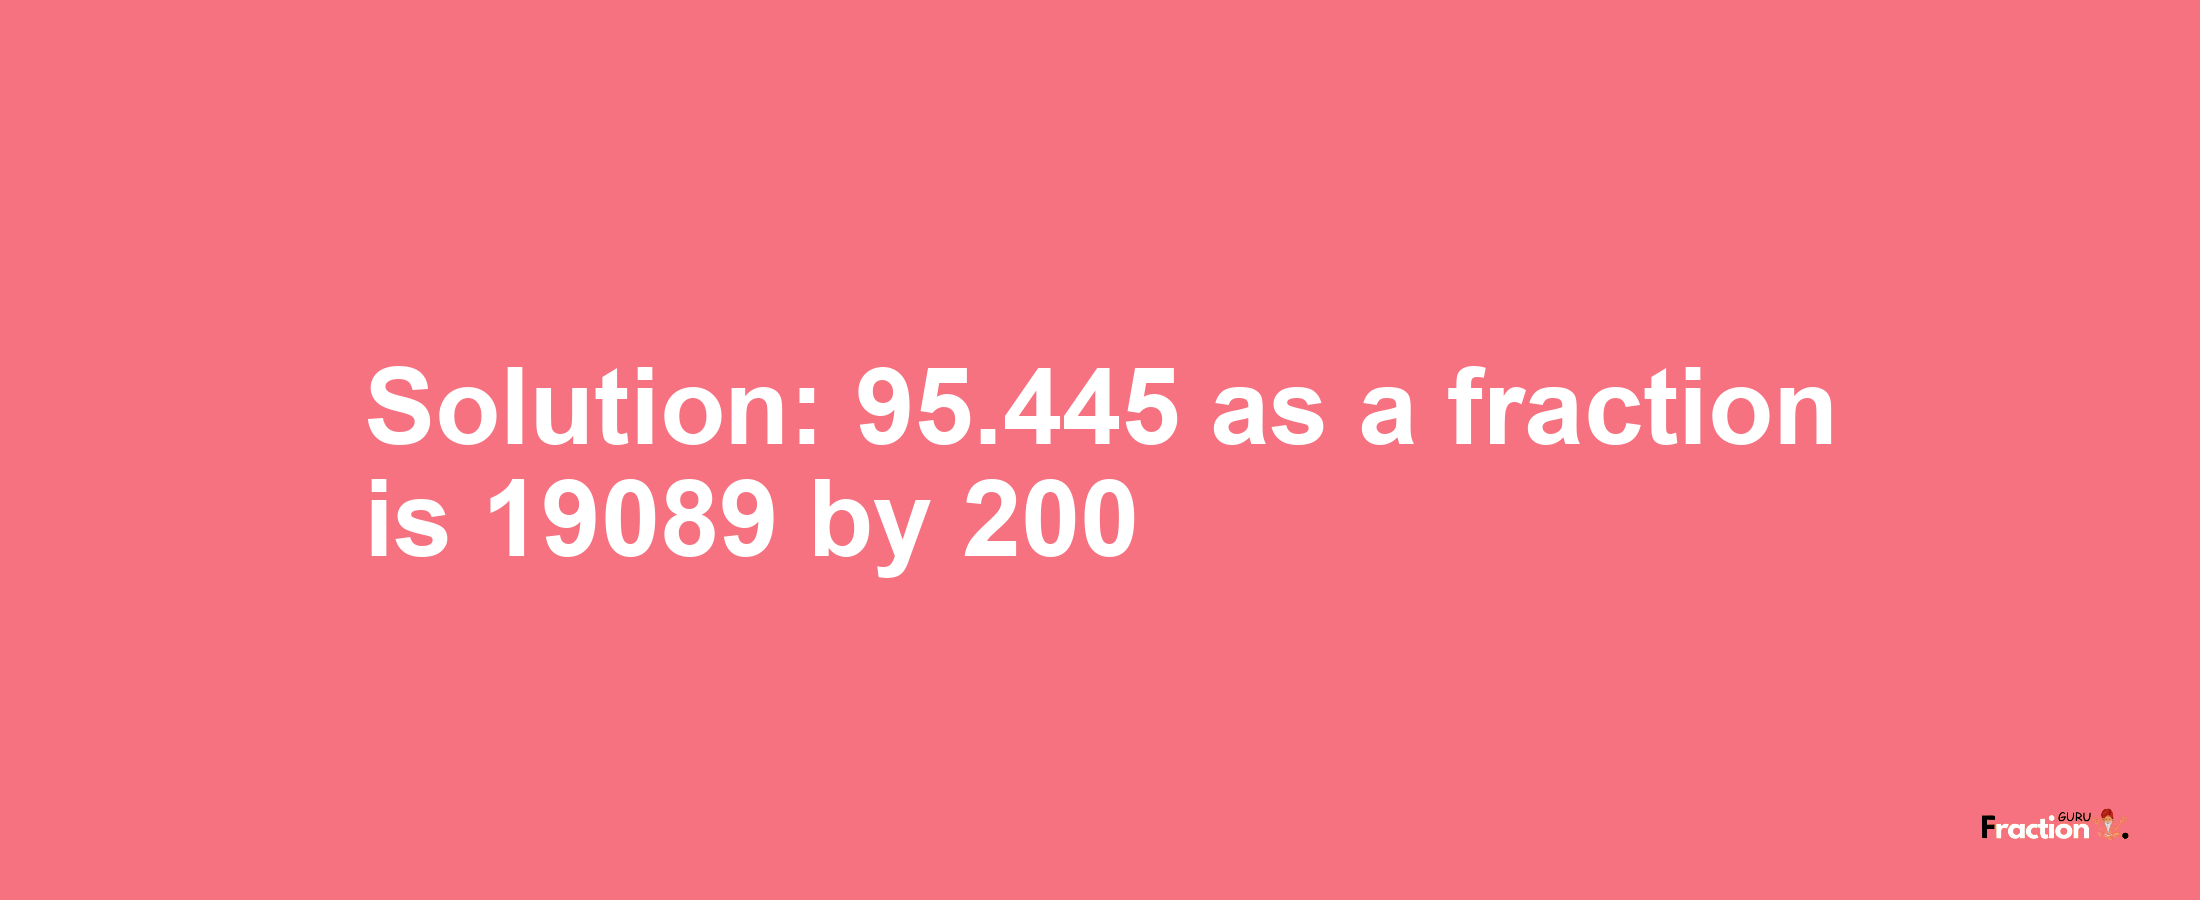 Solution:95.445 as a fraction is 19089/200